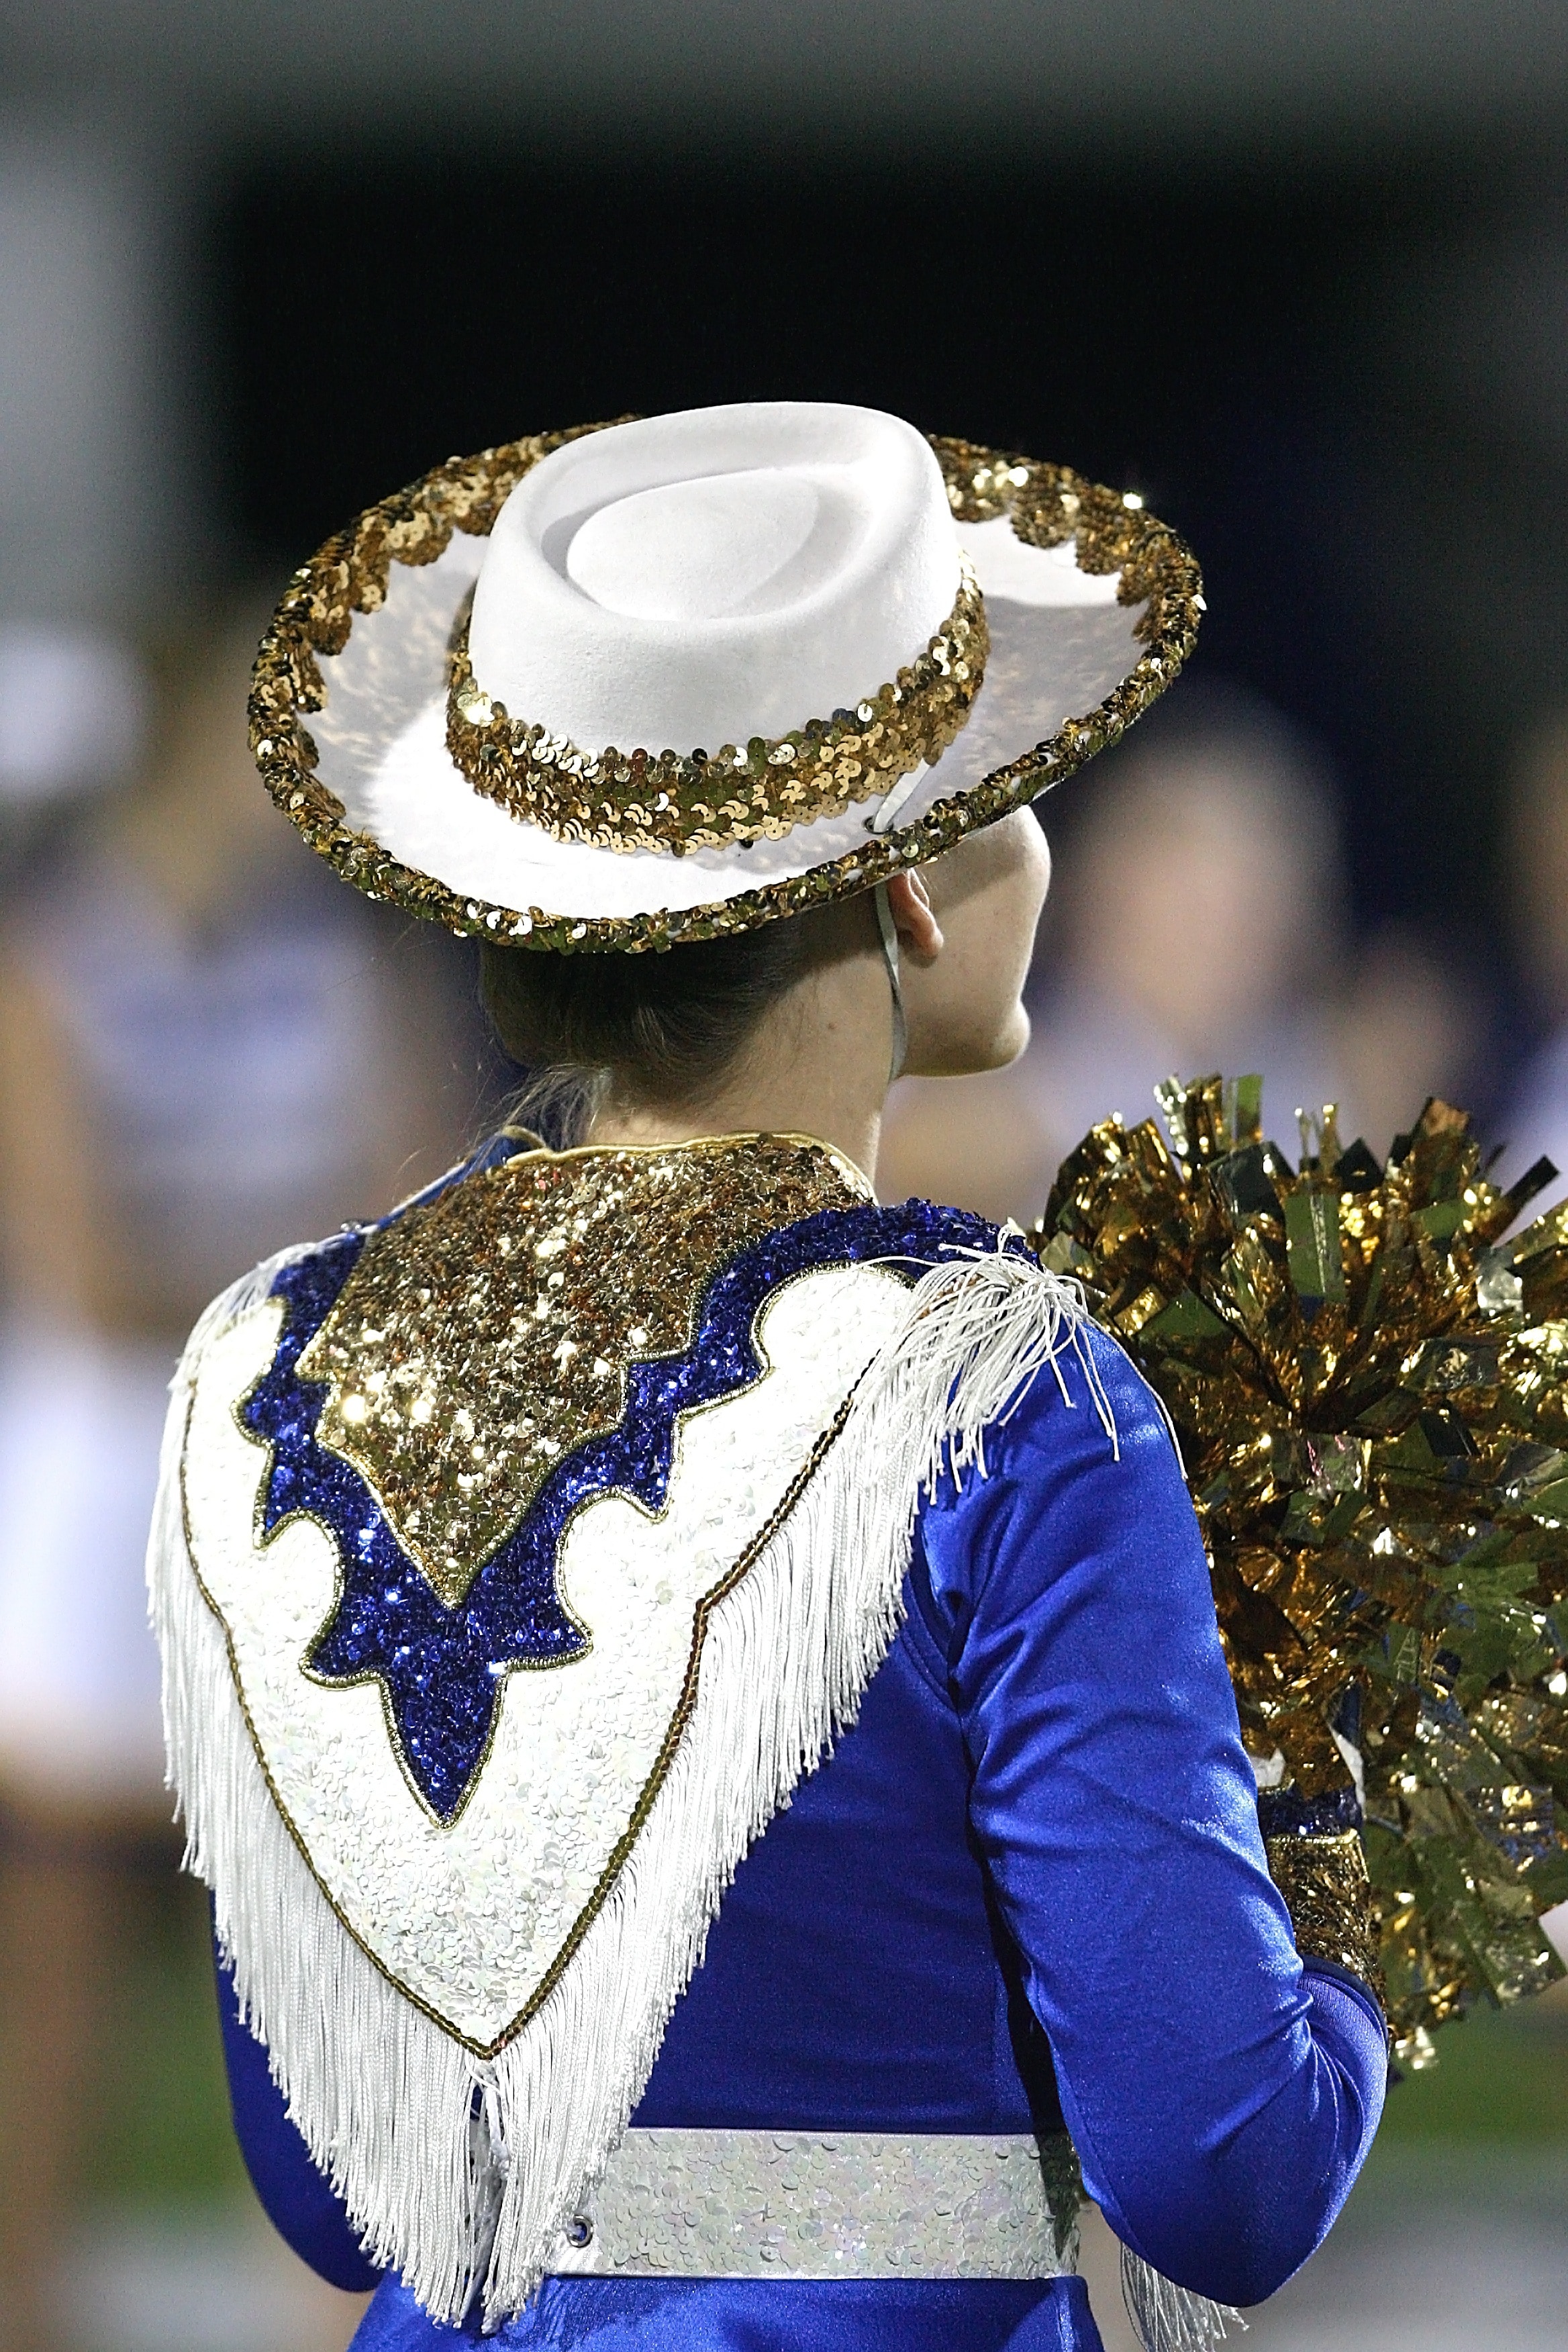 women's white and gold hat and blue and white dress uniform